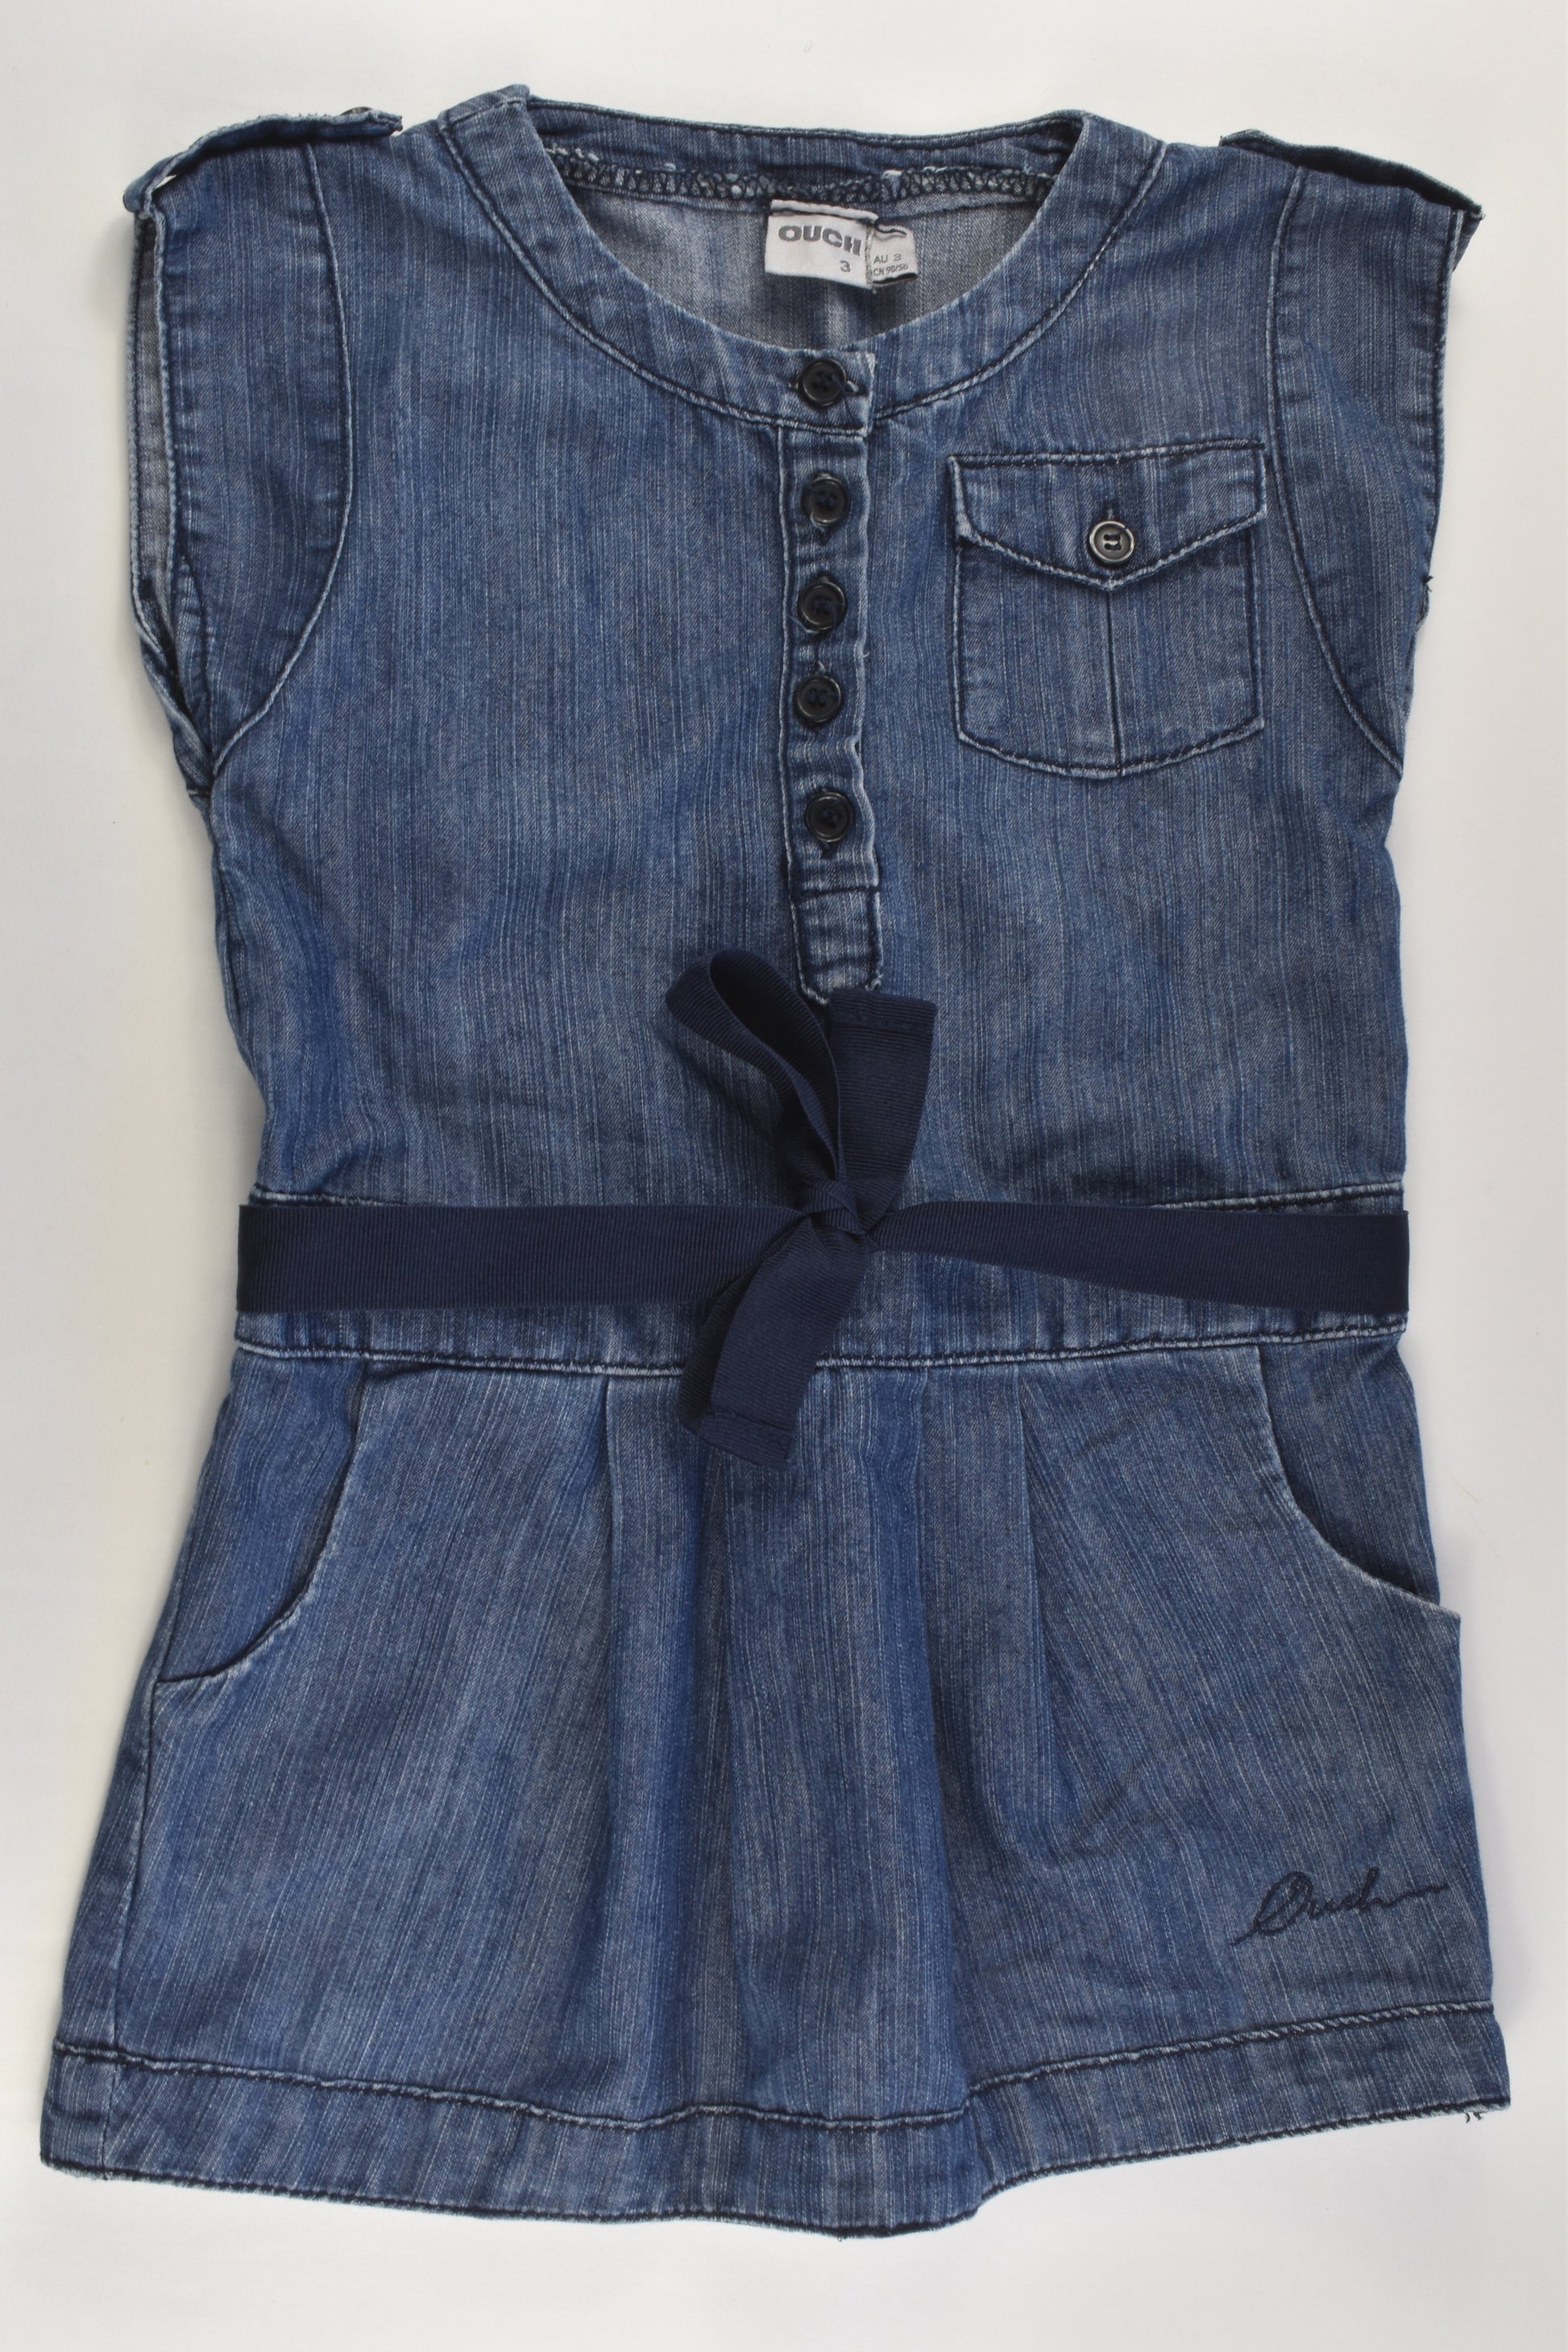 Ouch Size 3 Denim Dress